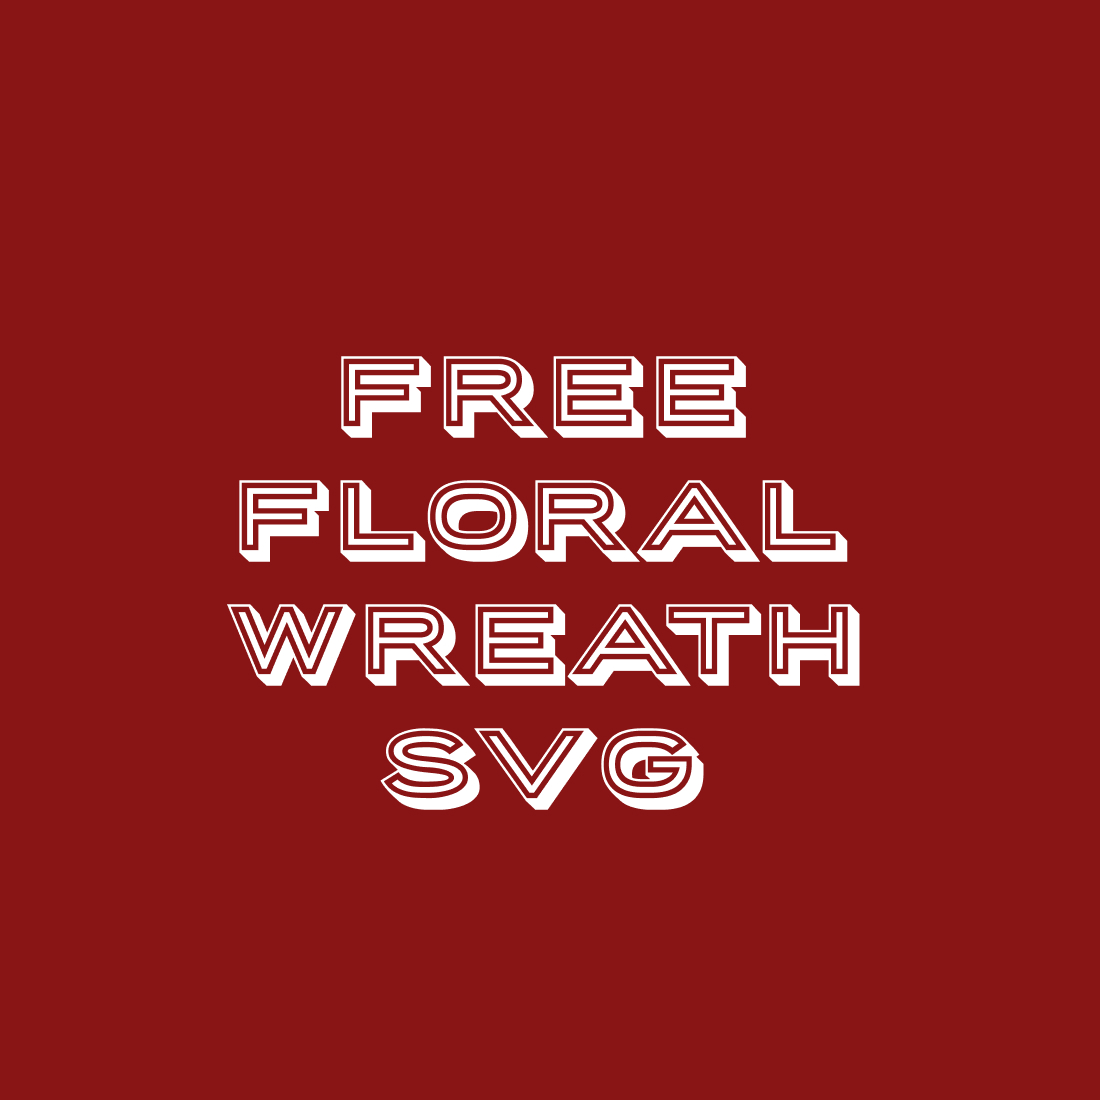 Free Floral Wreath SVG cover.